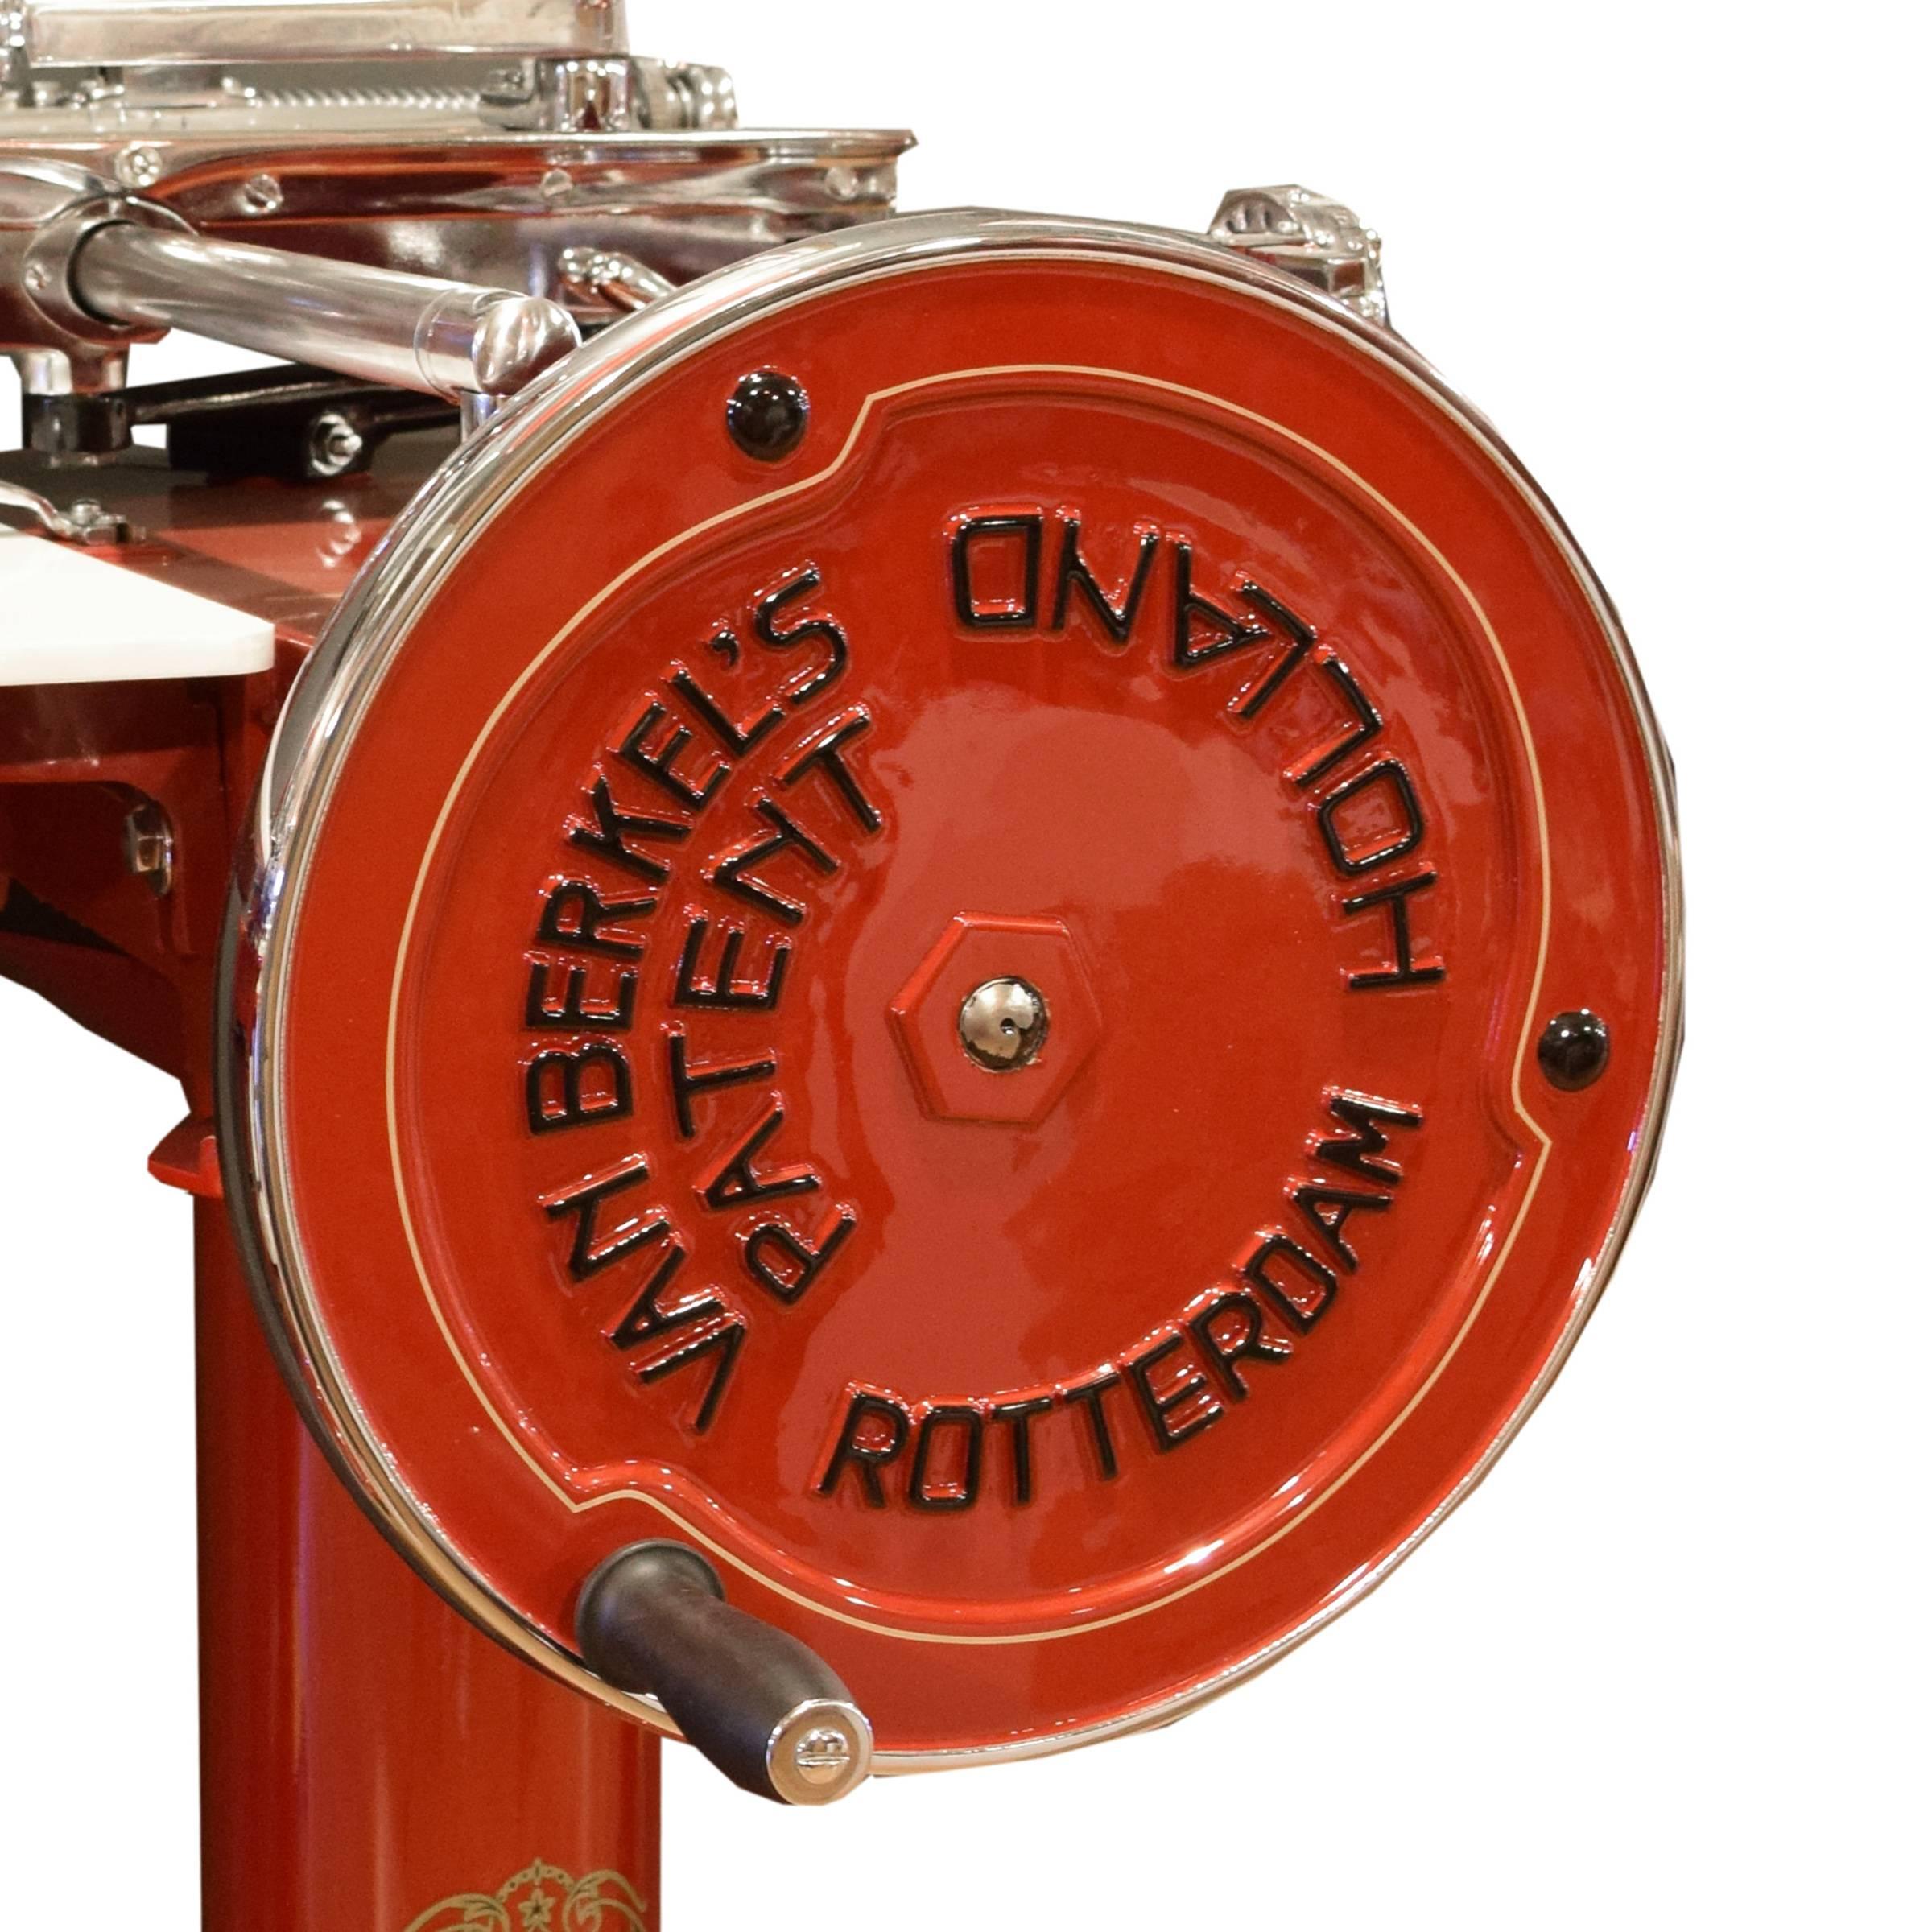 A rare Berkel model 7 meat slicer in a red high gloss enamel with gold pinstriping, manufactured in Rotterdam, Holland. This model, manufactured from 1922-1928, is flywheel operated and features 15 different slicing thicknesses and a blade